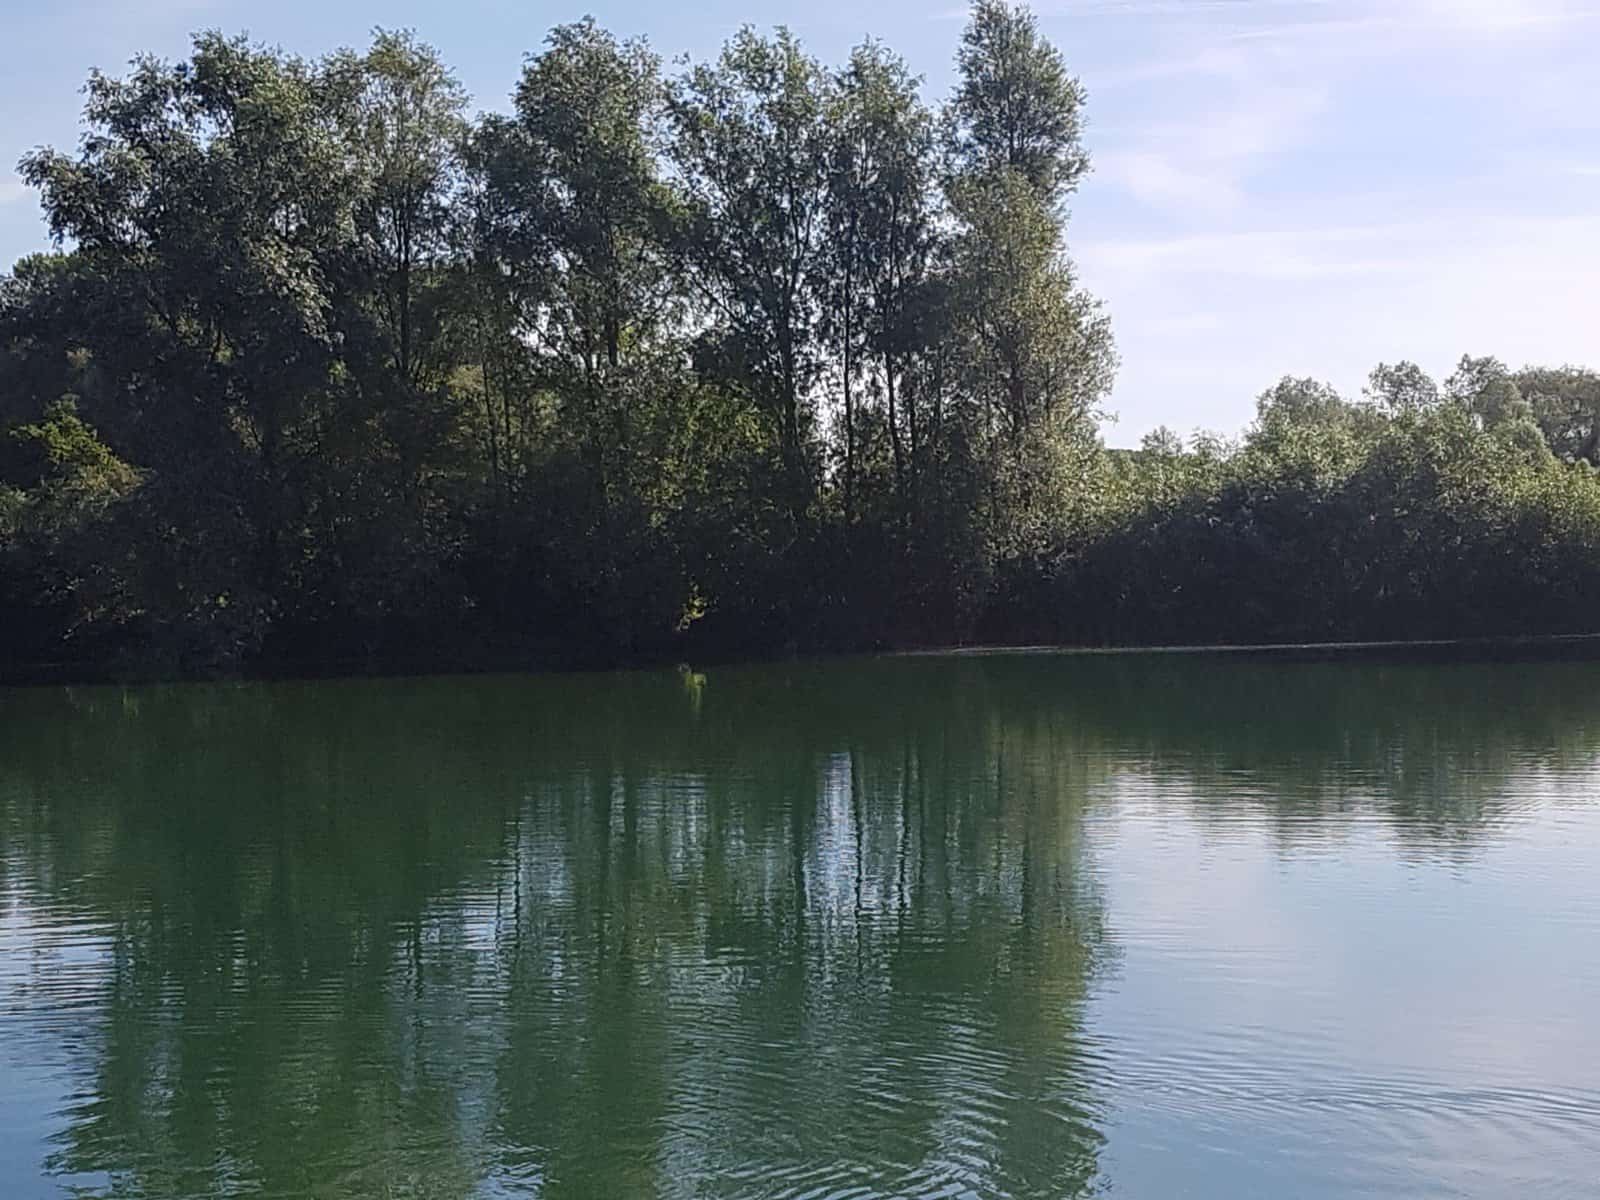 Where to Find Carp in a Lake When Fishing